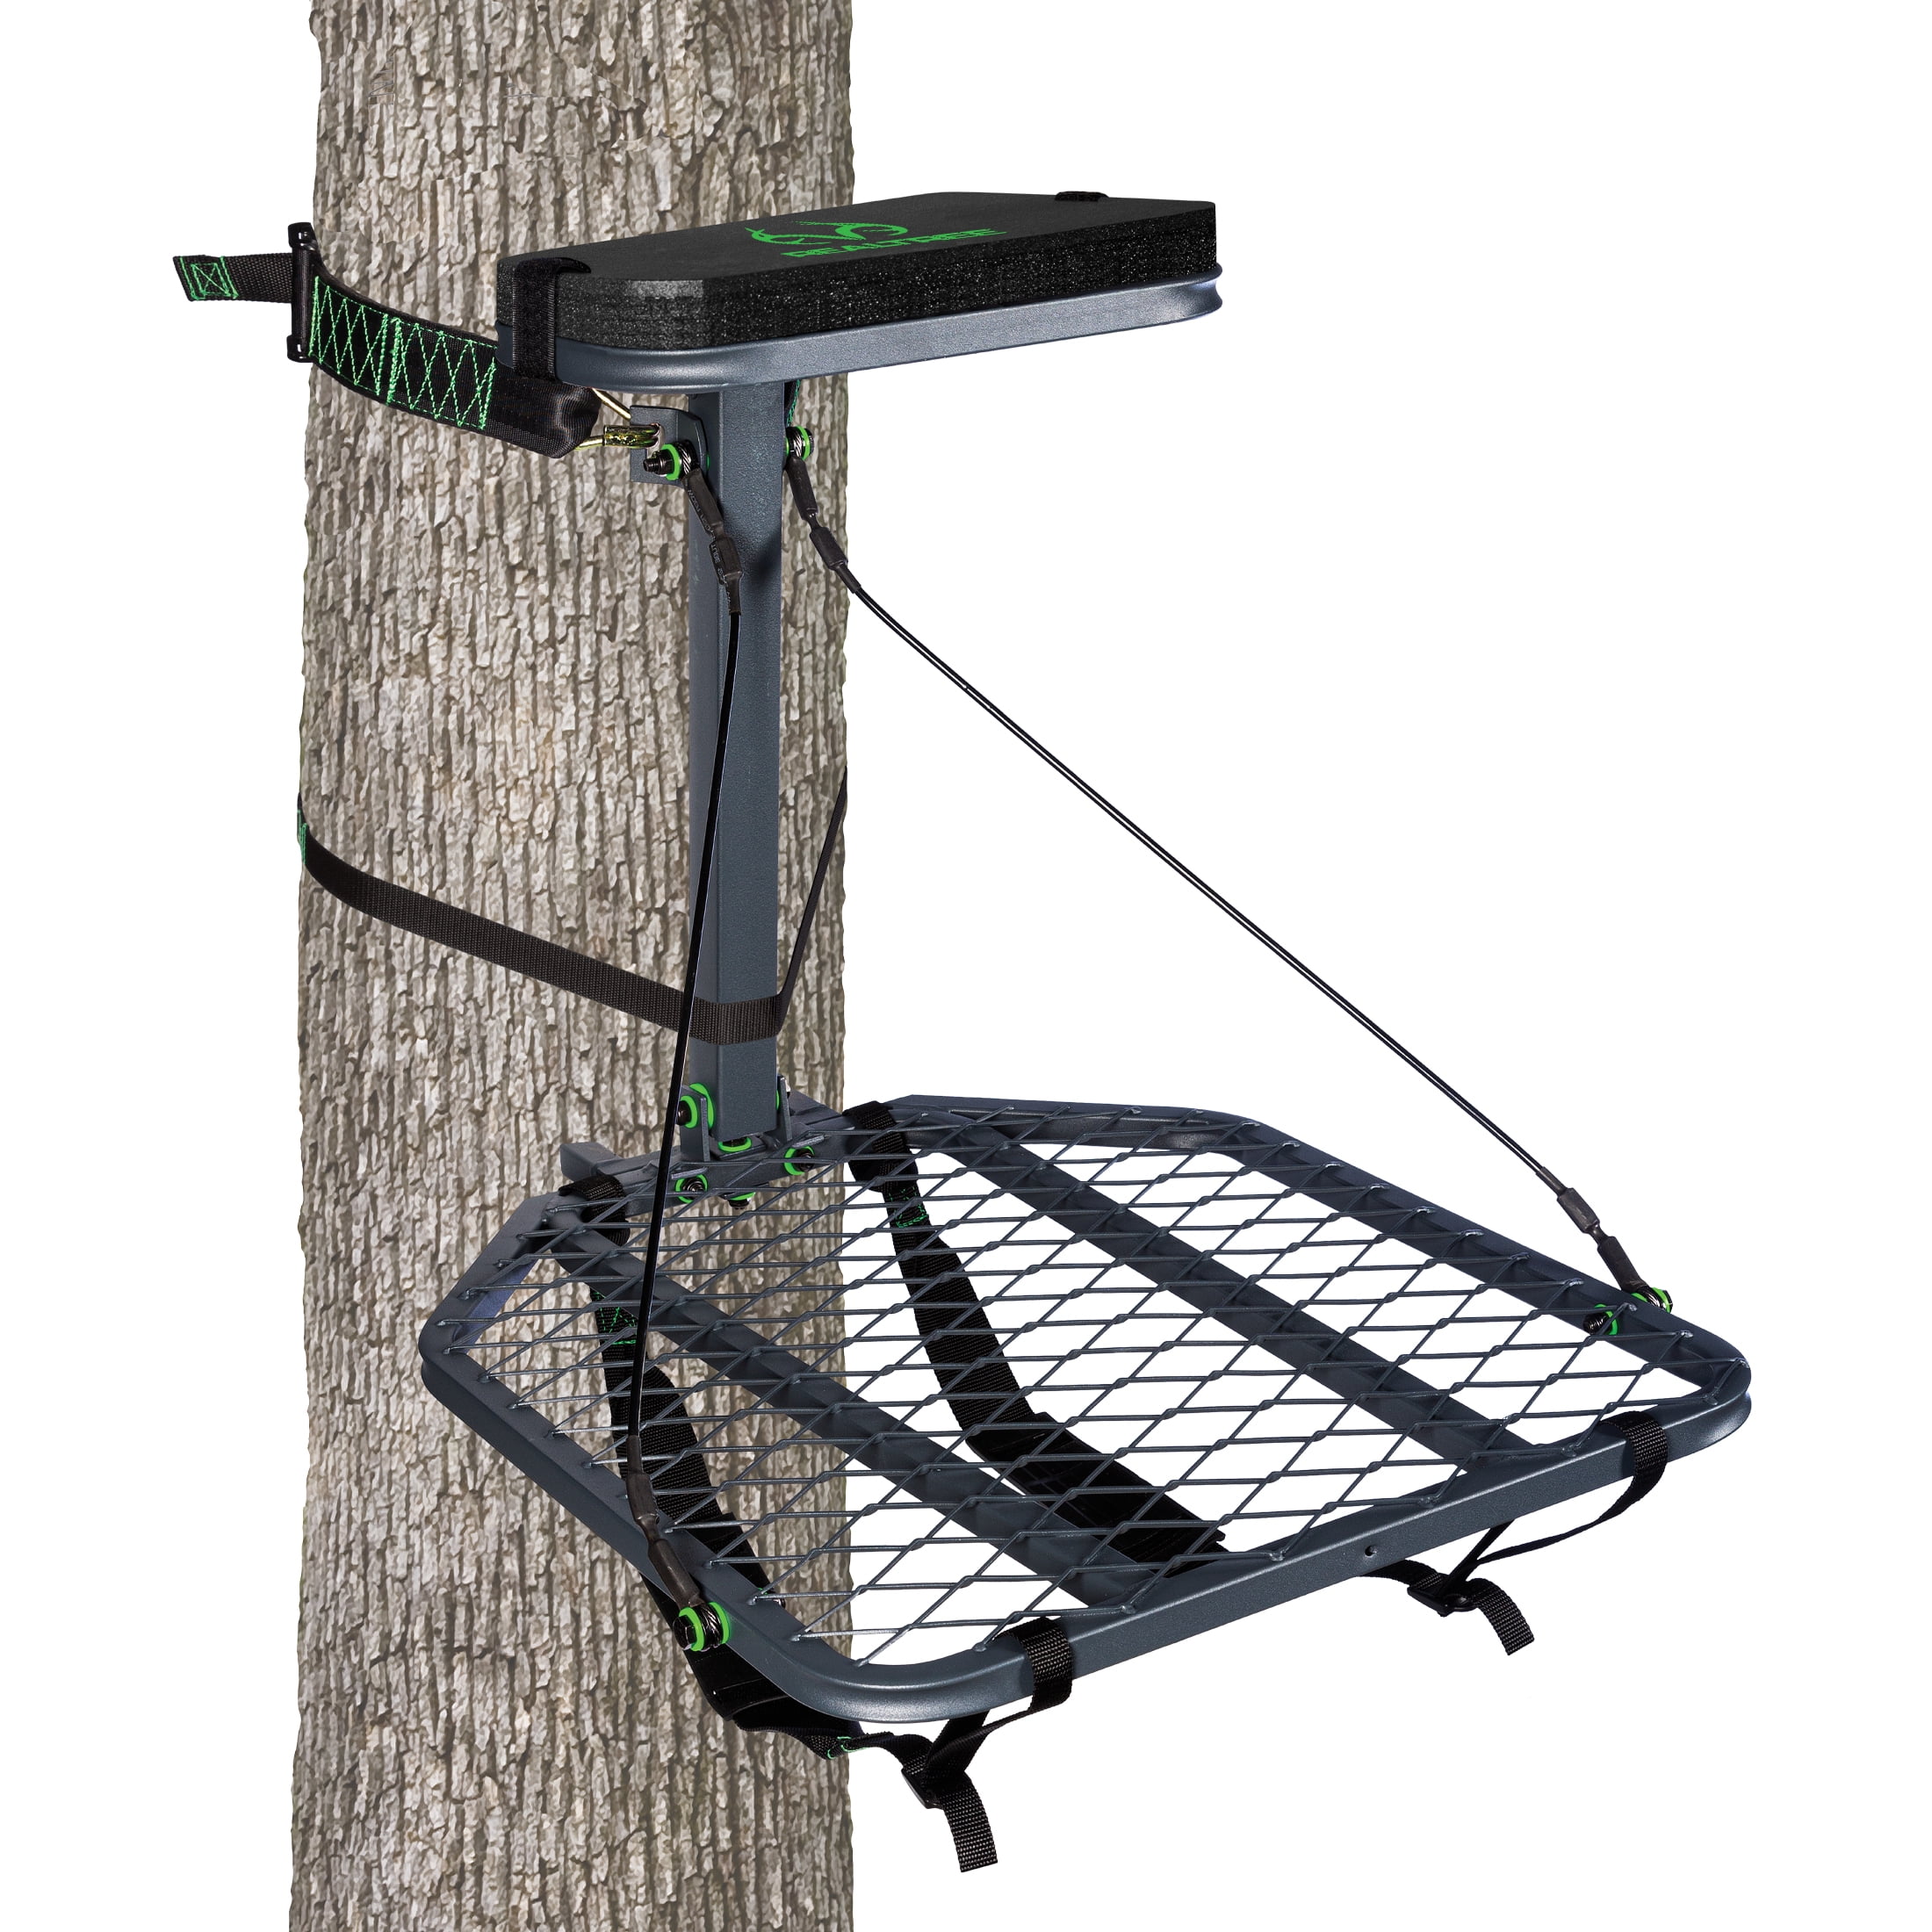 Summit Treestands Featherweight Hang-on Treestand Aluminum Model SU82109 for sale online 